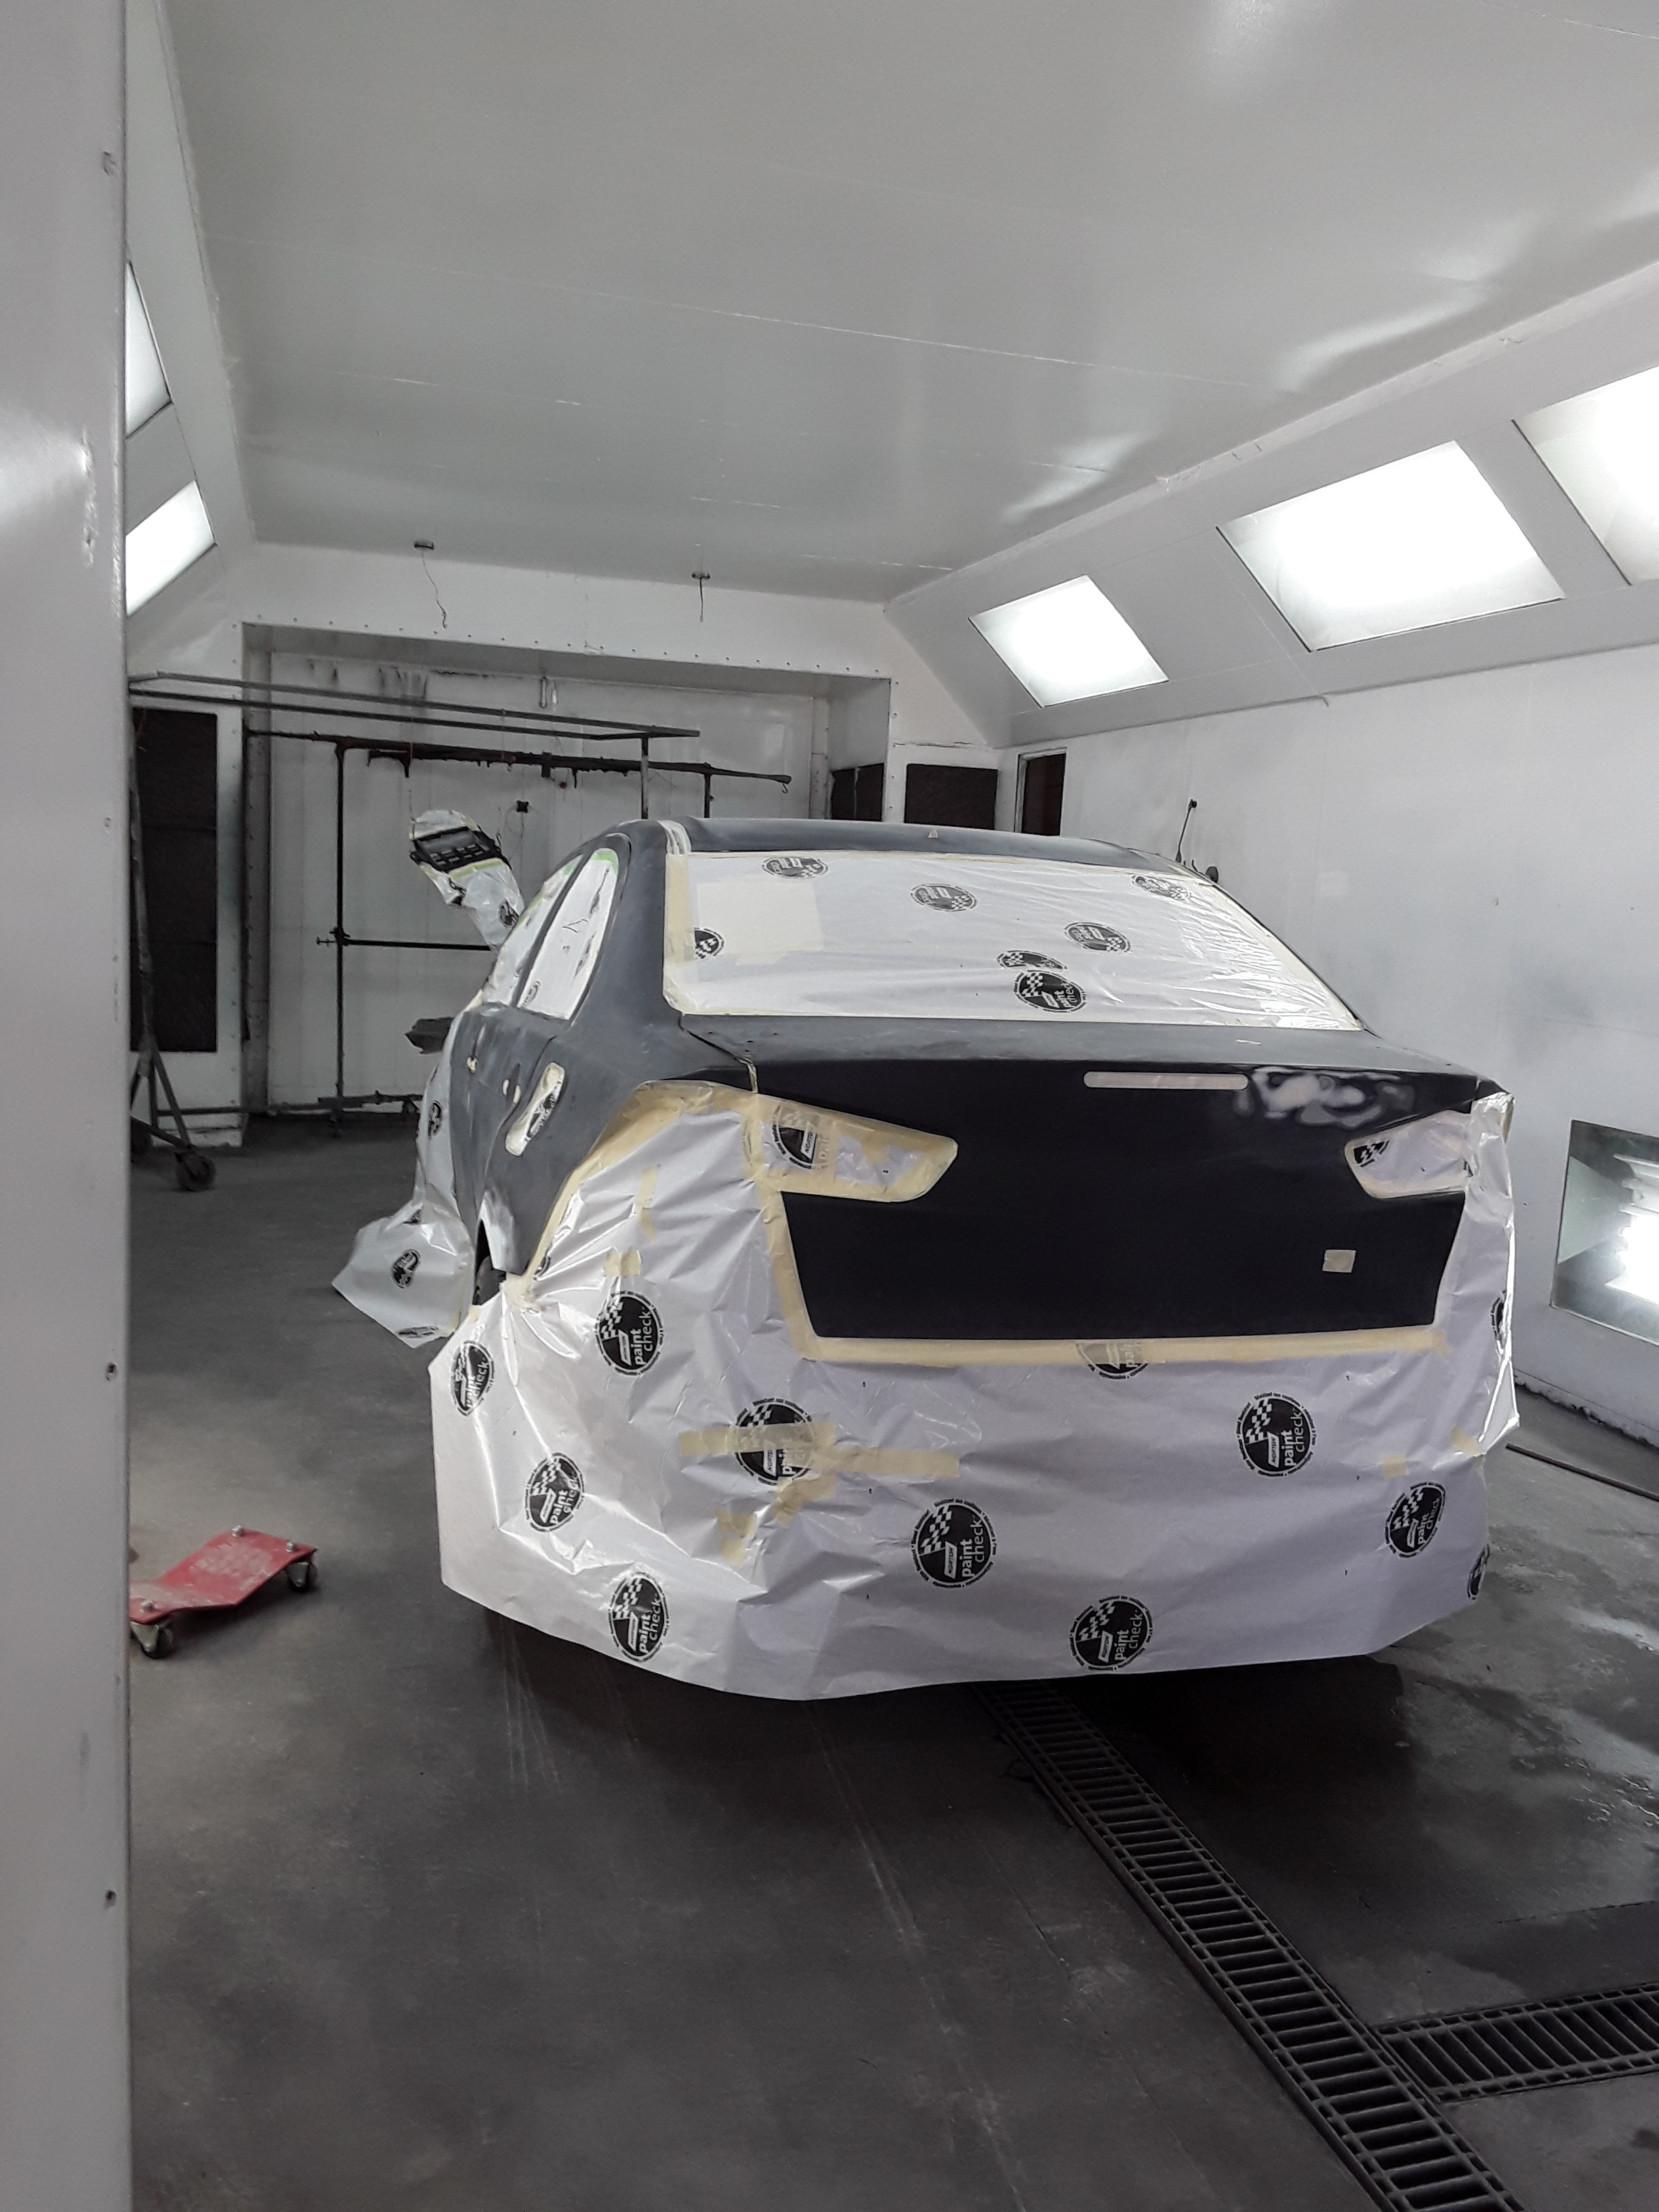 Evo X in a paint booth